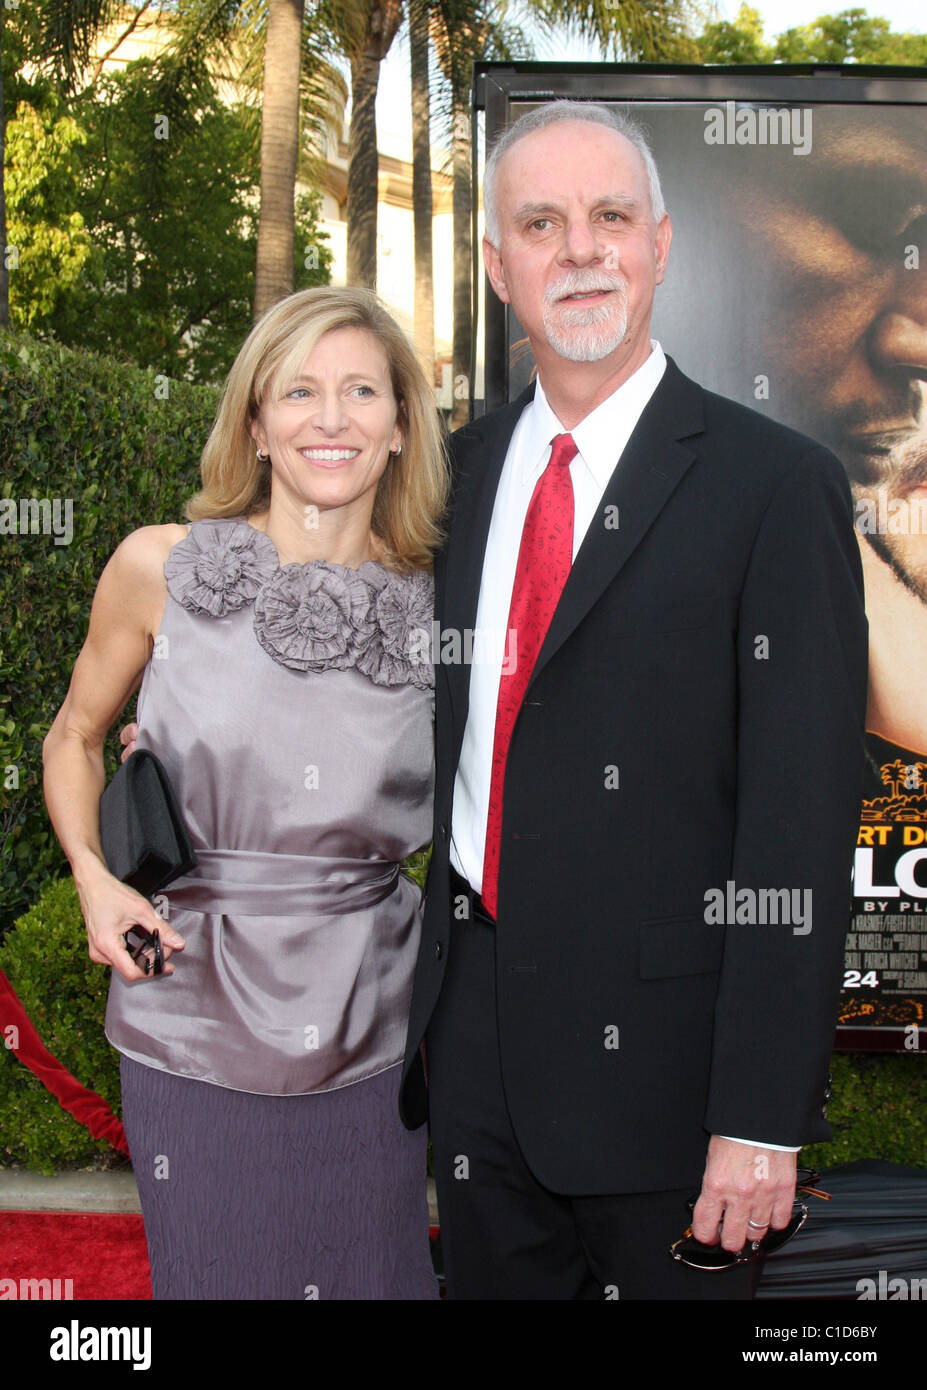 Steve Lopez and wife - The Soloist Premiere at the Paramount